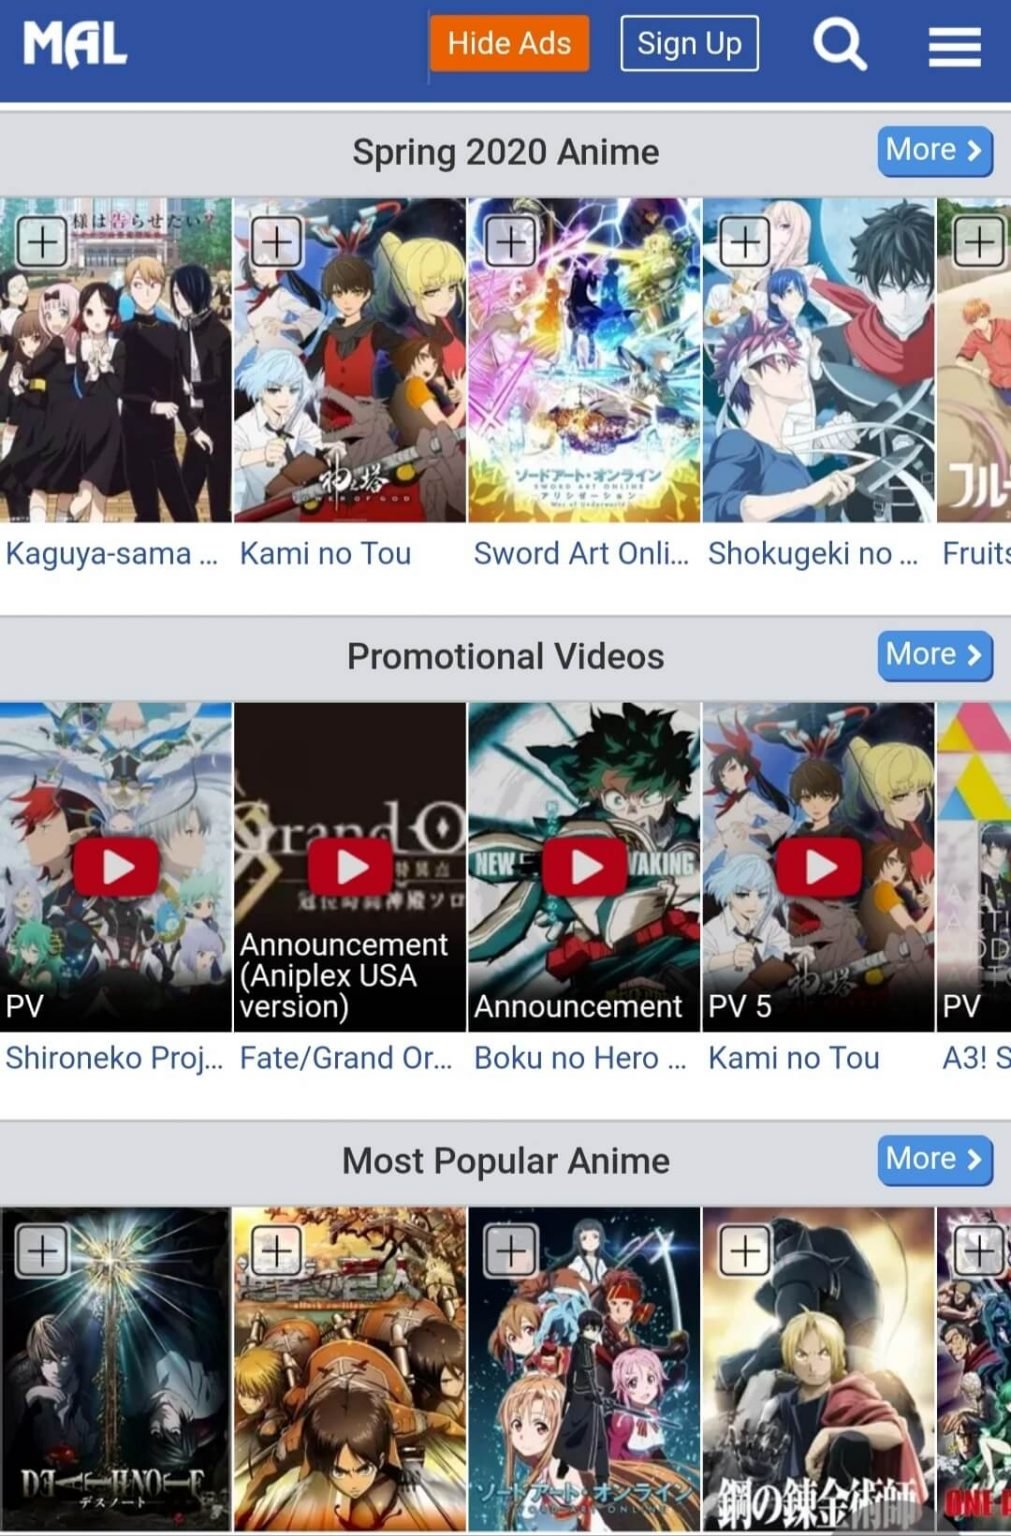 10 Best Sites To Watch Anime Movies Online for Free in 2020